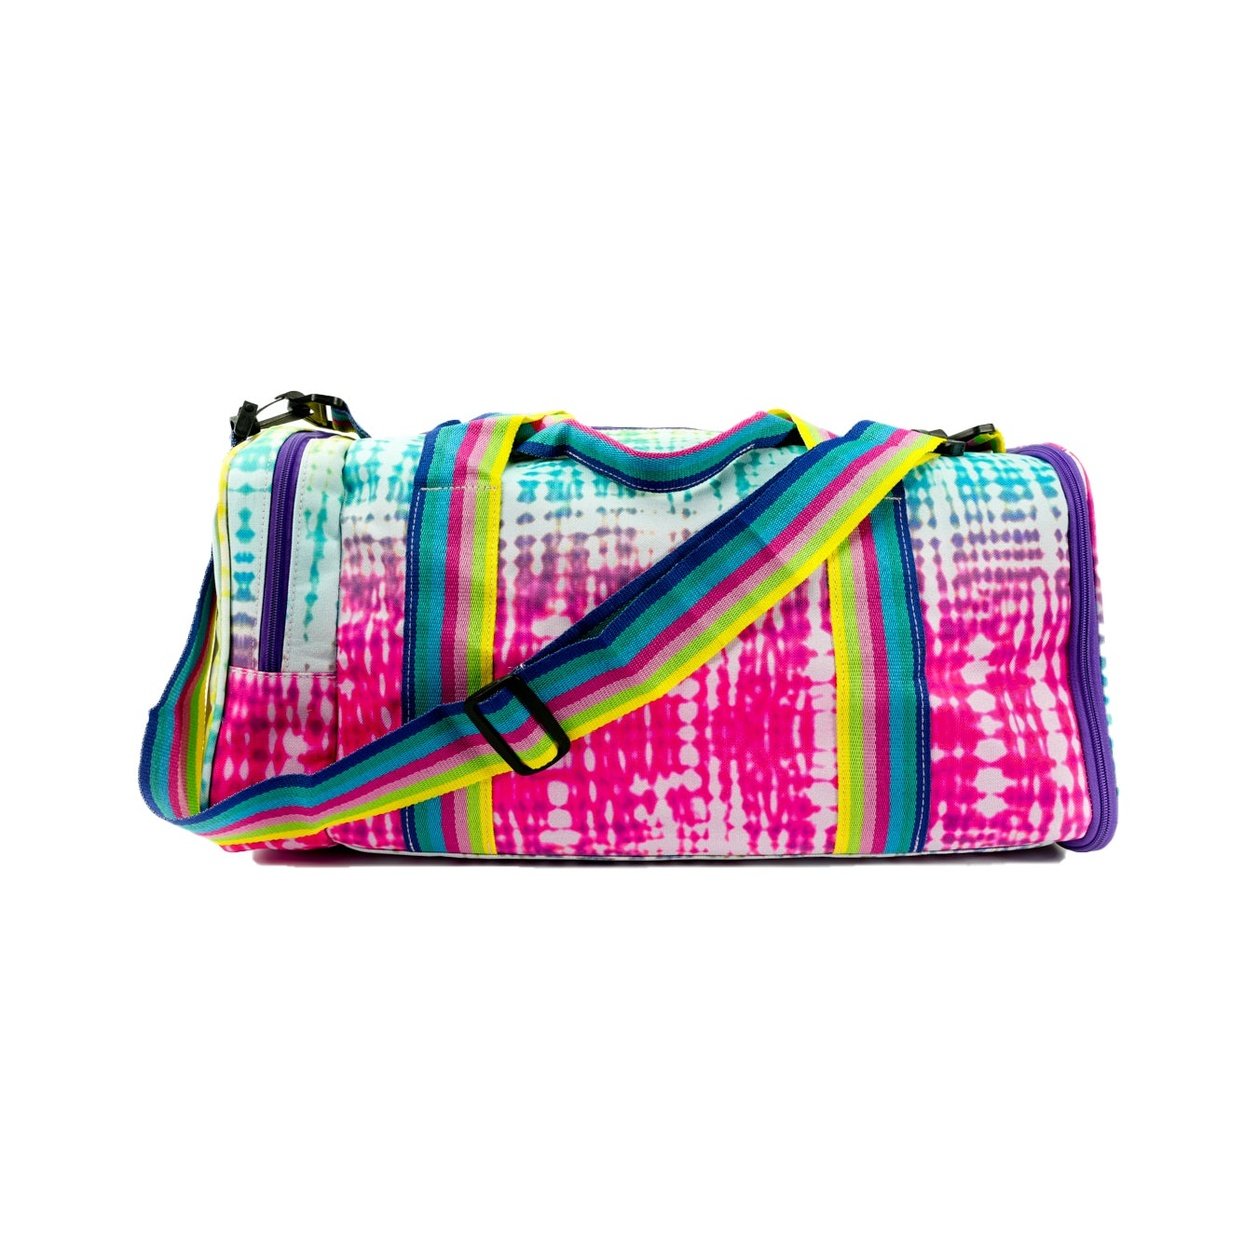 Abstract Summer Colors Duffle Bag